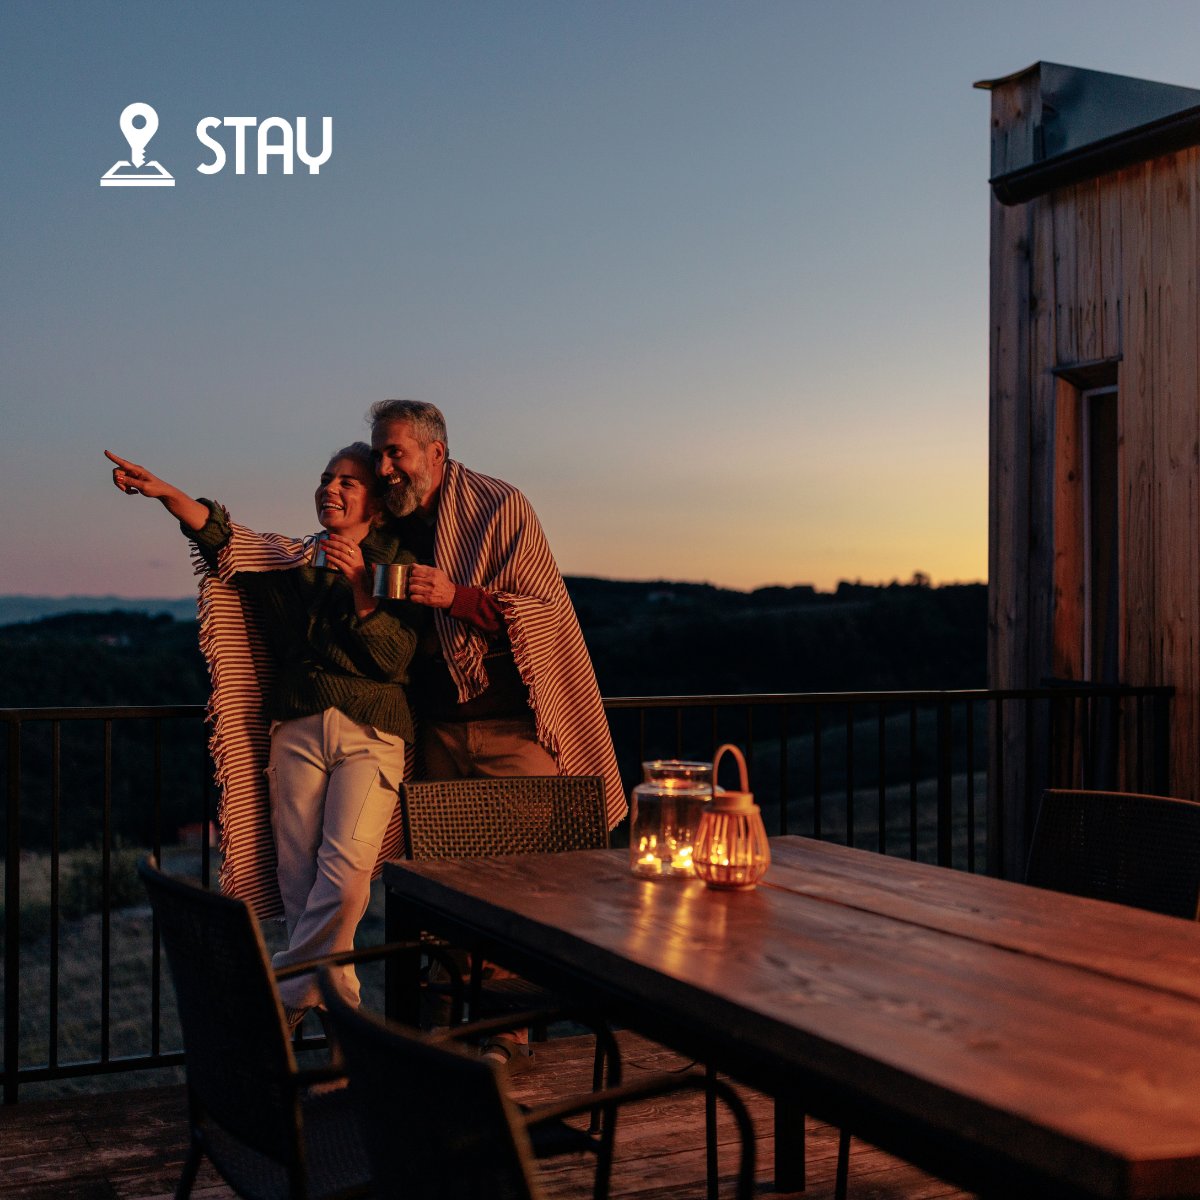 Time for a romantic reset. Plan a vacation where every sunset is yours to share. Let a husband and wife getaway rekindle the sparkle.  

#RomanticGetaway #Stay